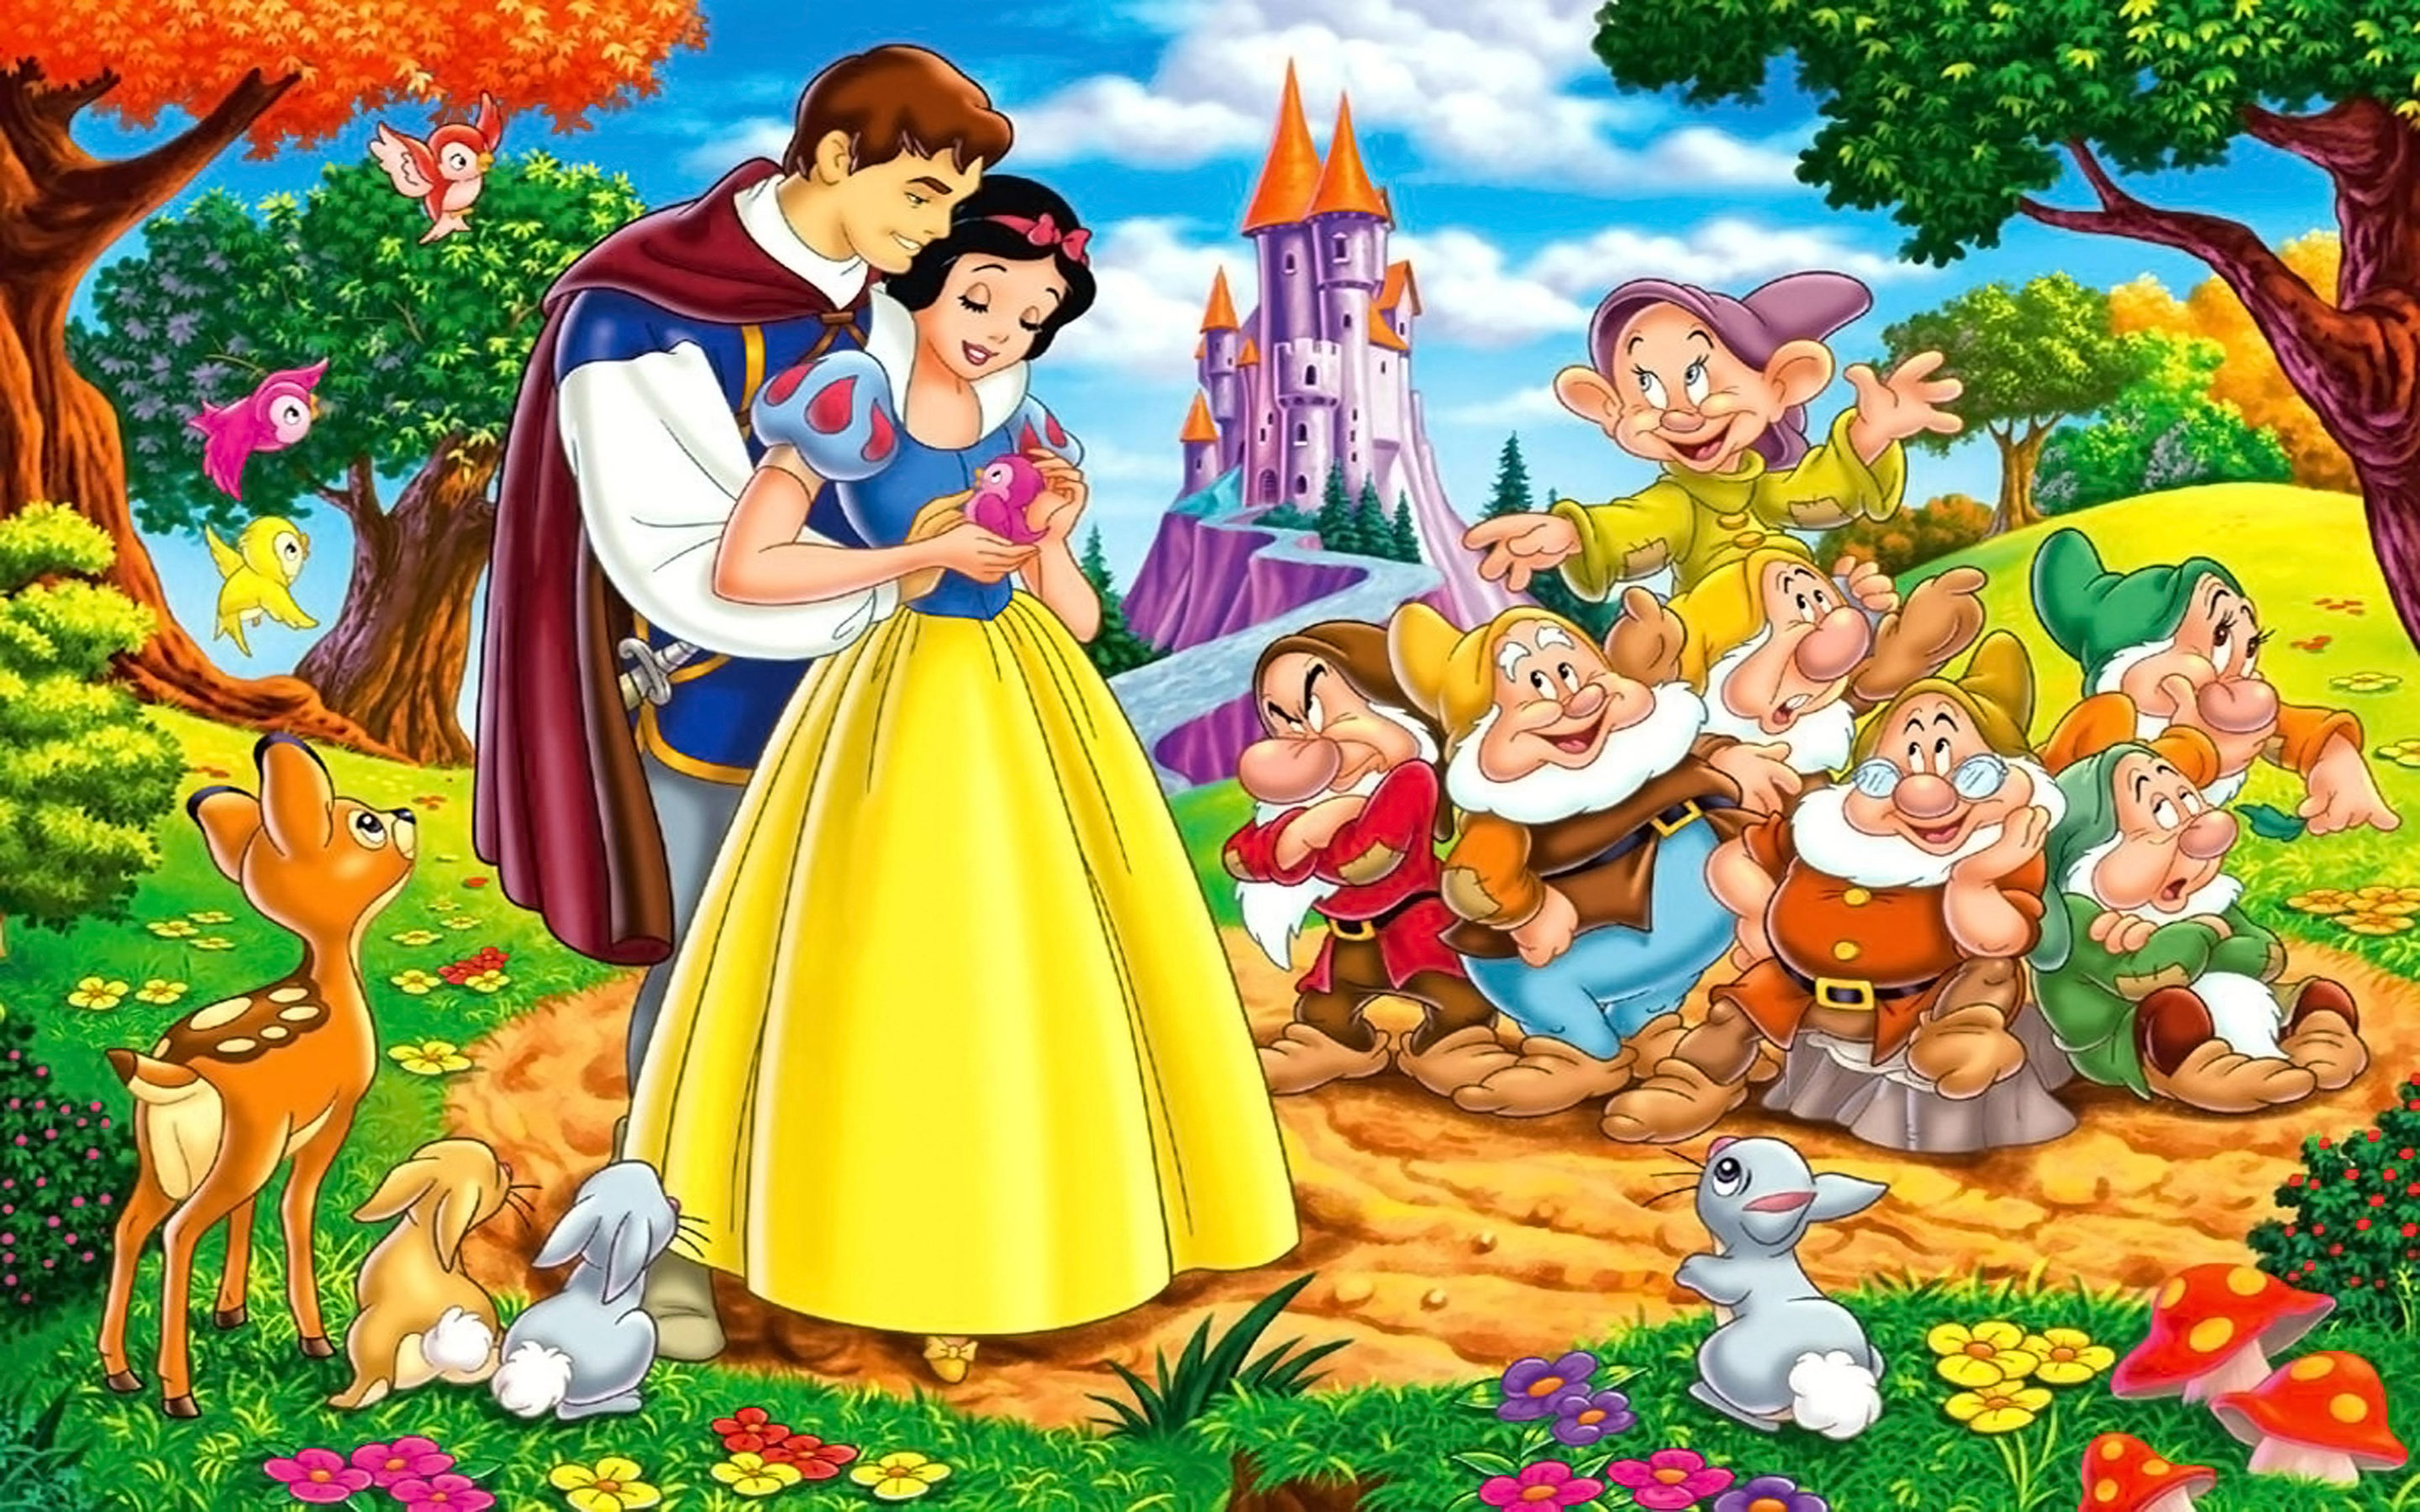 Snow White Prince And Seven Dwarfs Desktop Hd Wallpapers For Mobile